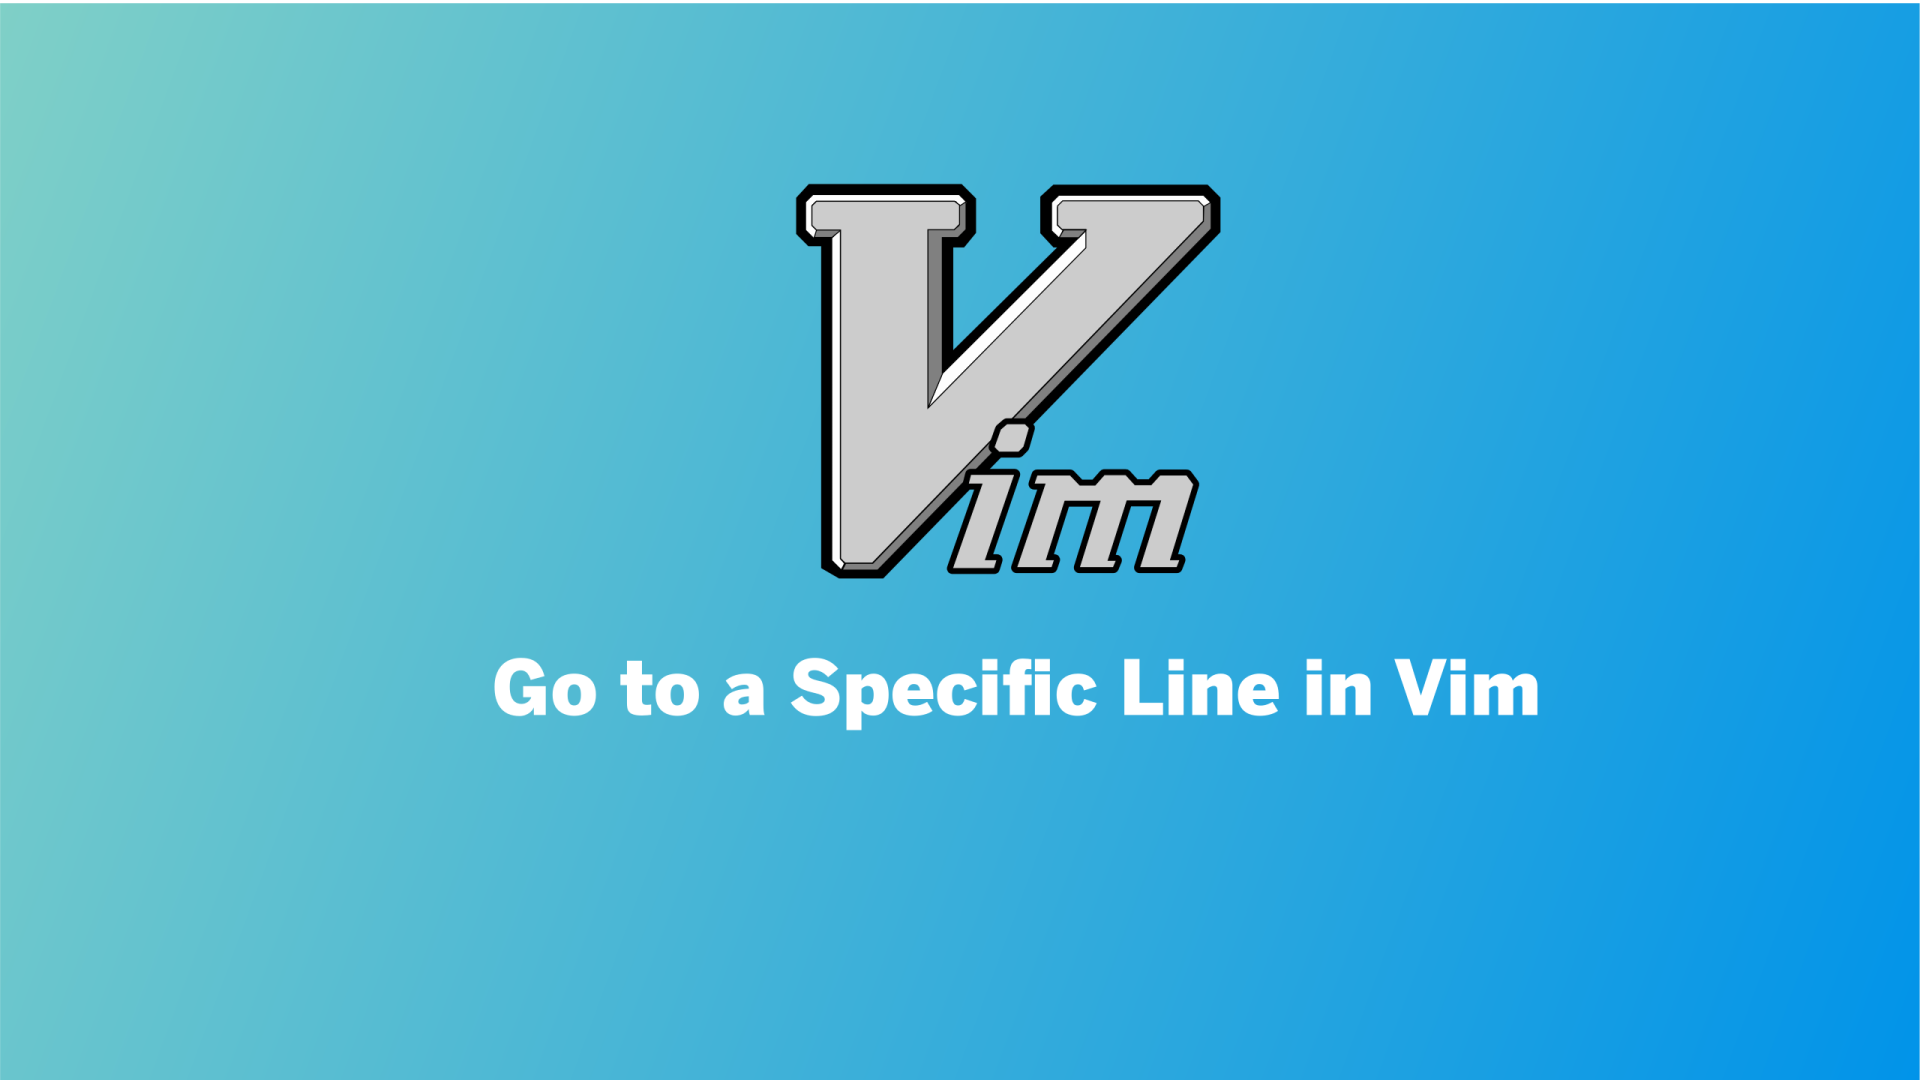 Go to a Specific Line in Vim